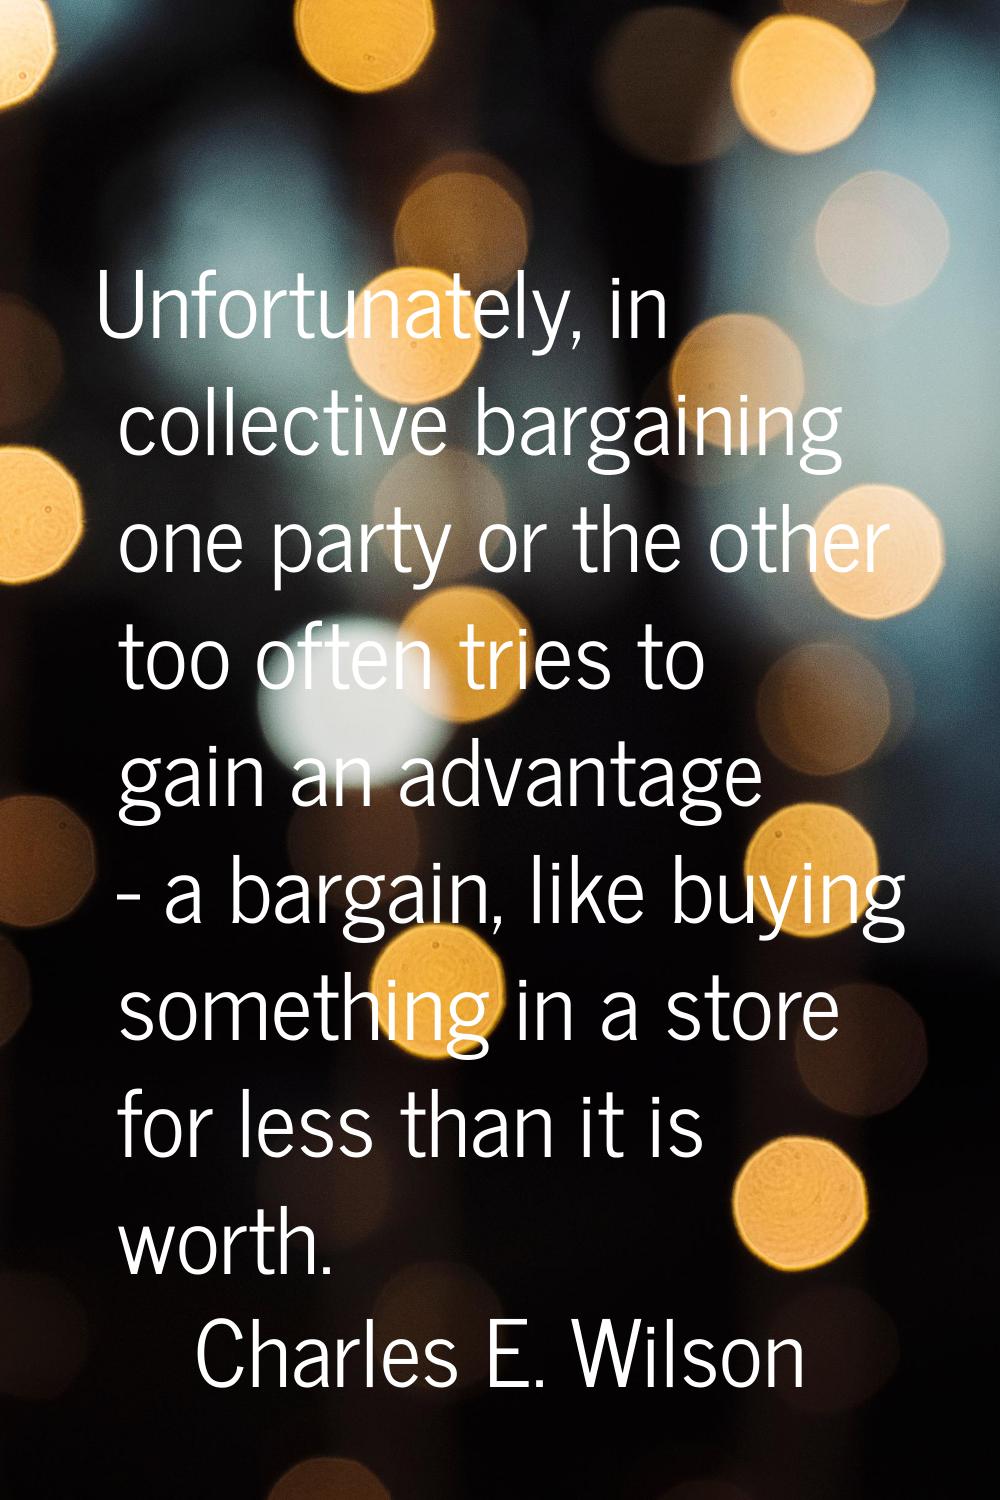 Unfortunately, in collective bargaining one party or the other too often tries to gain an advantage